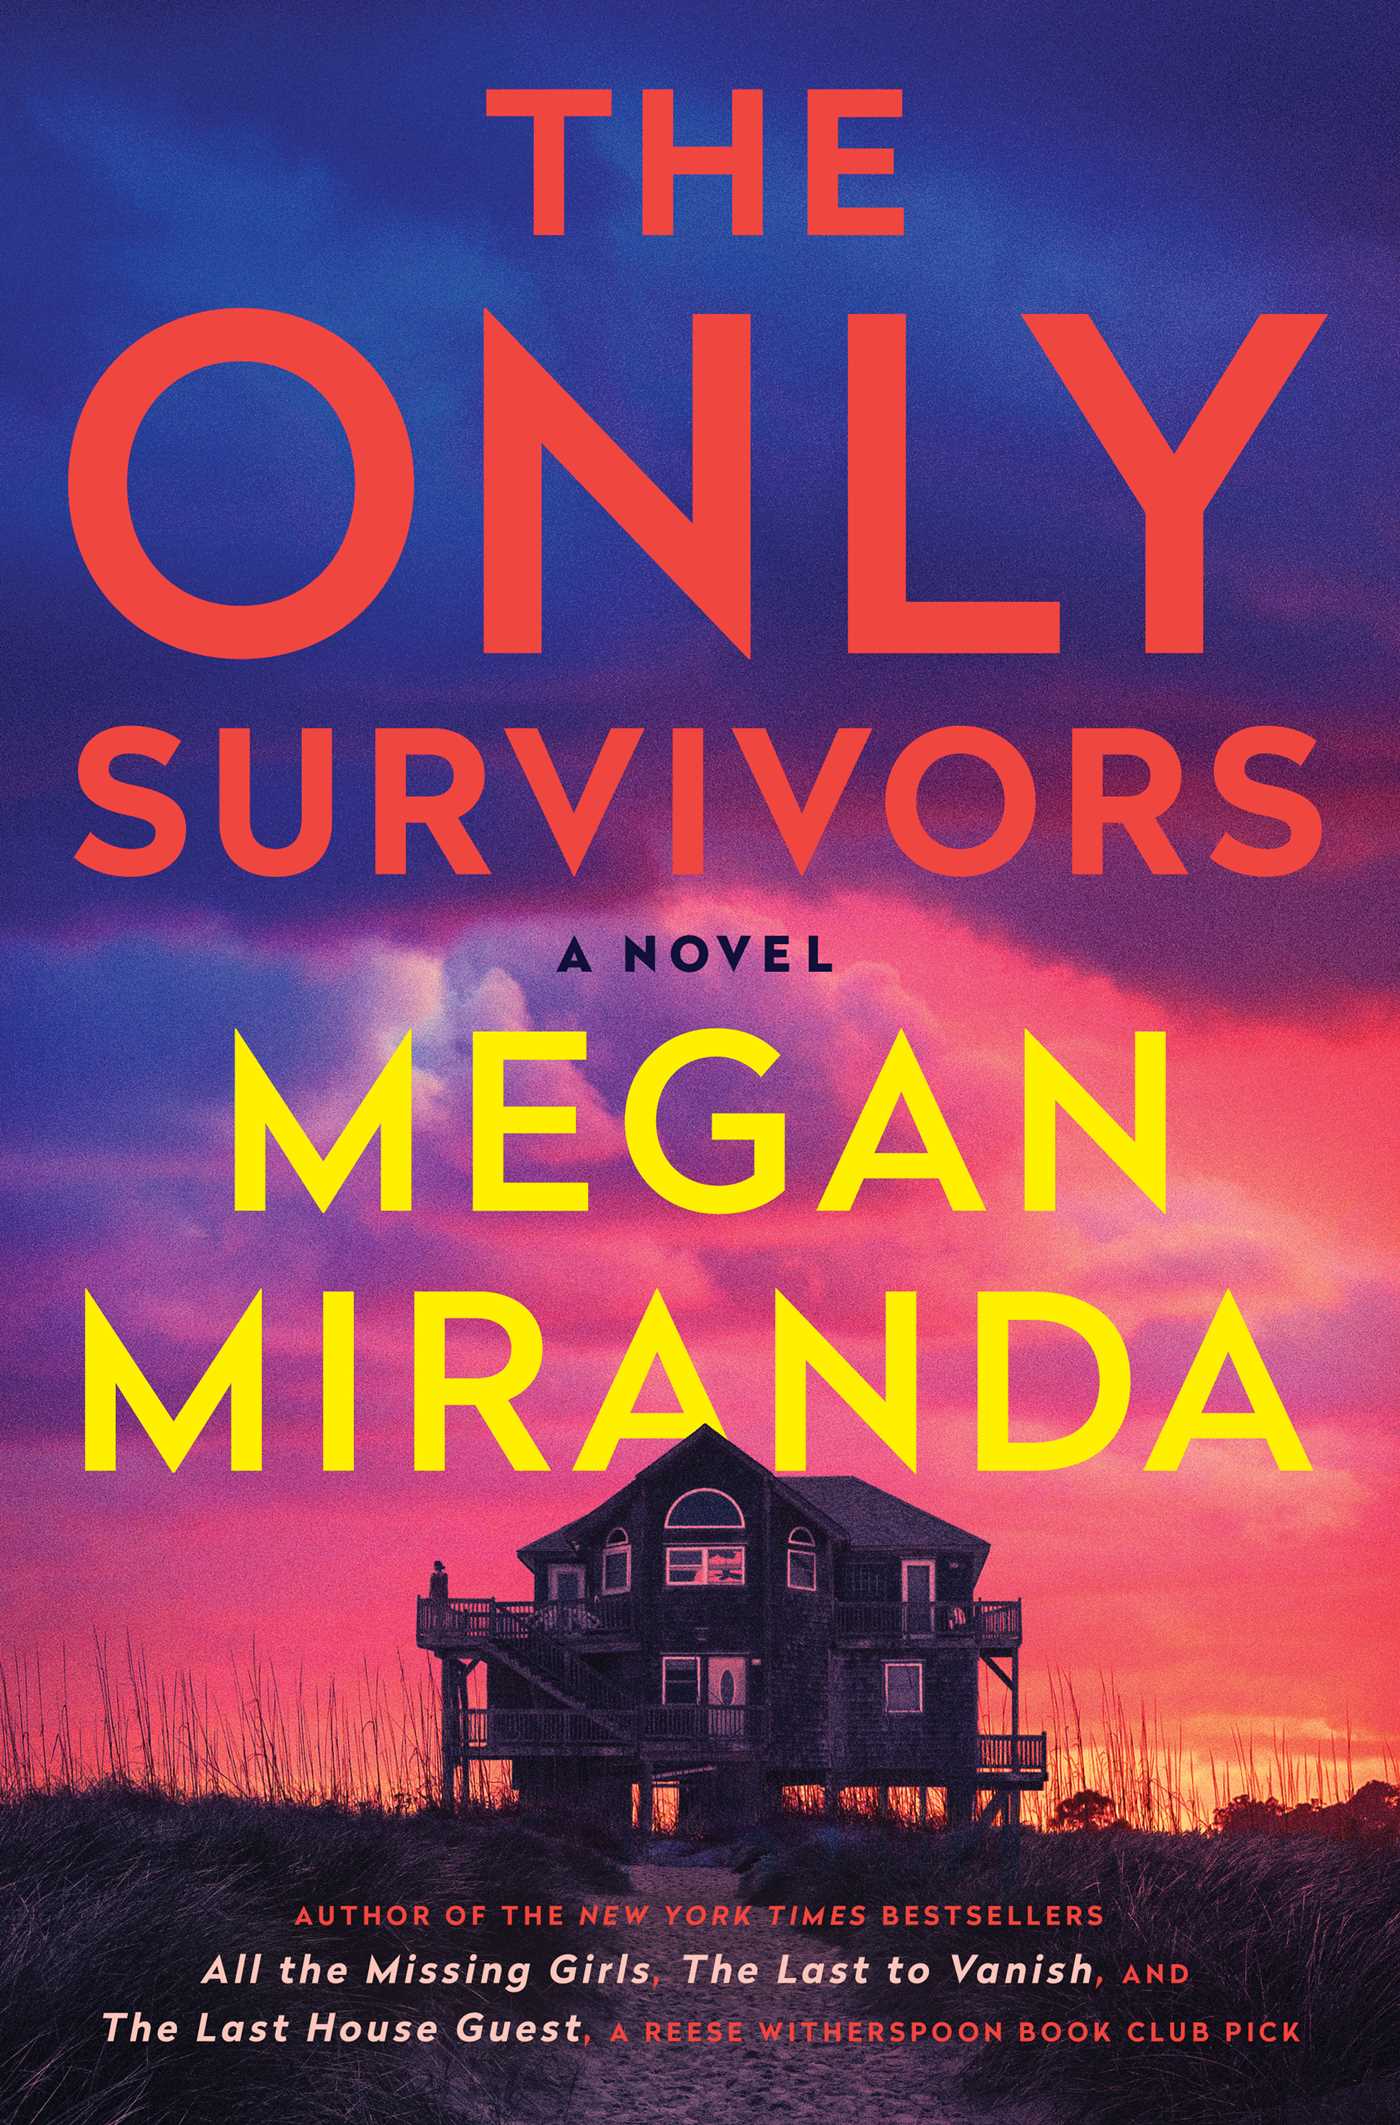 Image for "The Only Survivors"